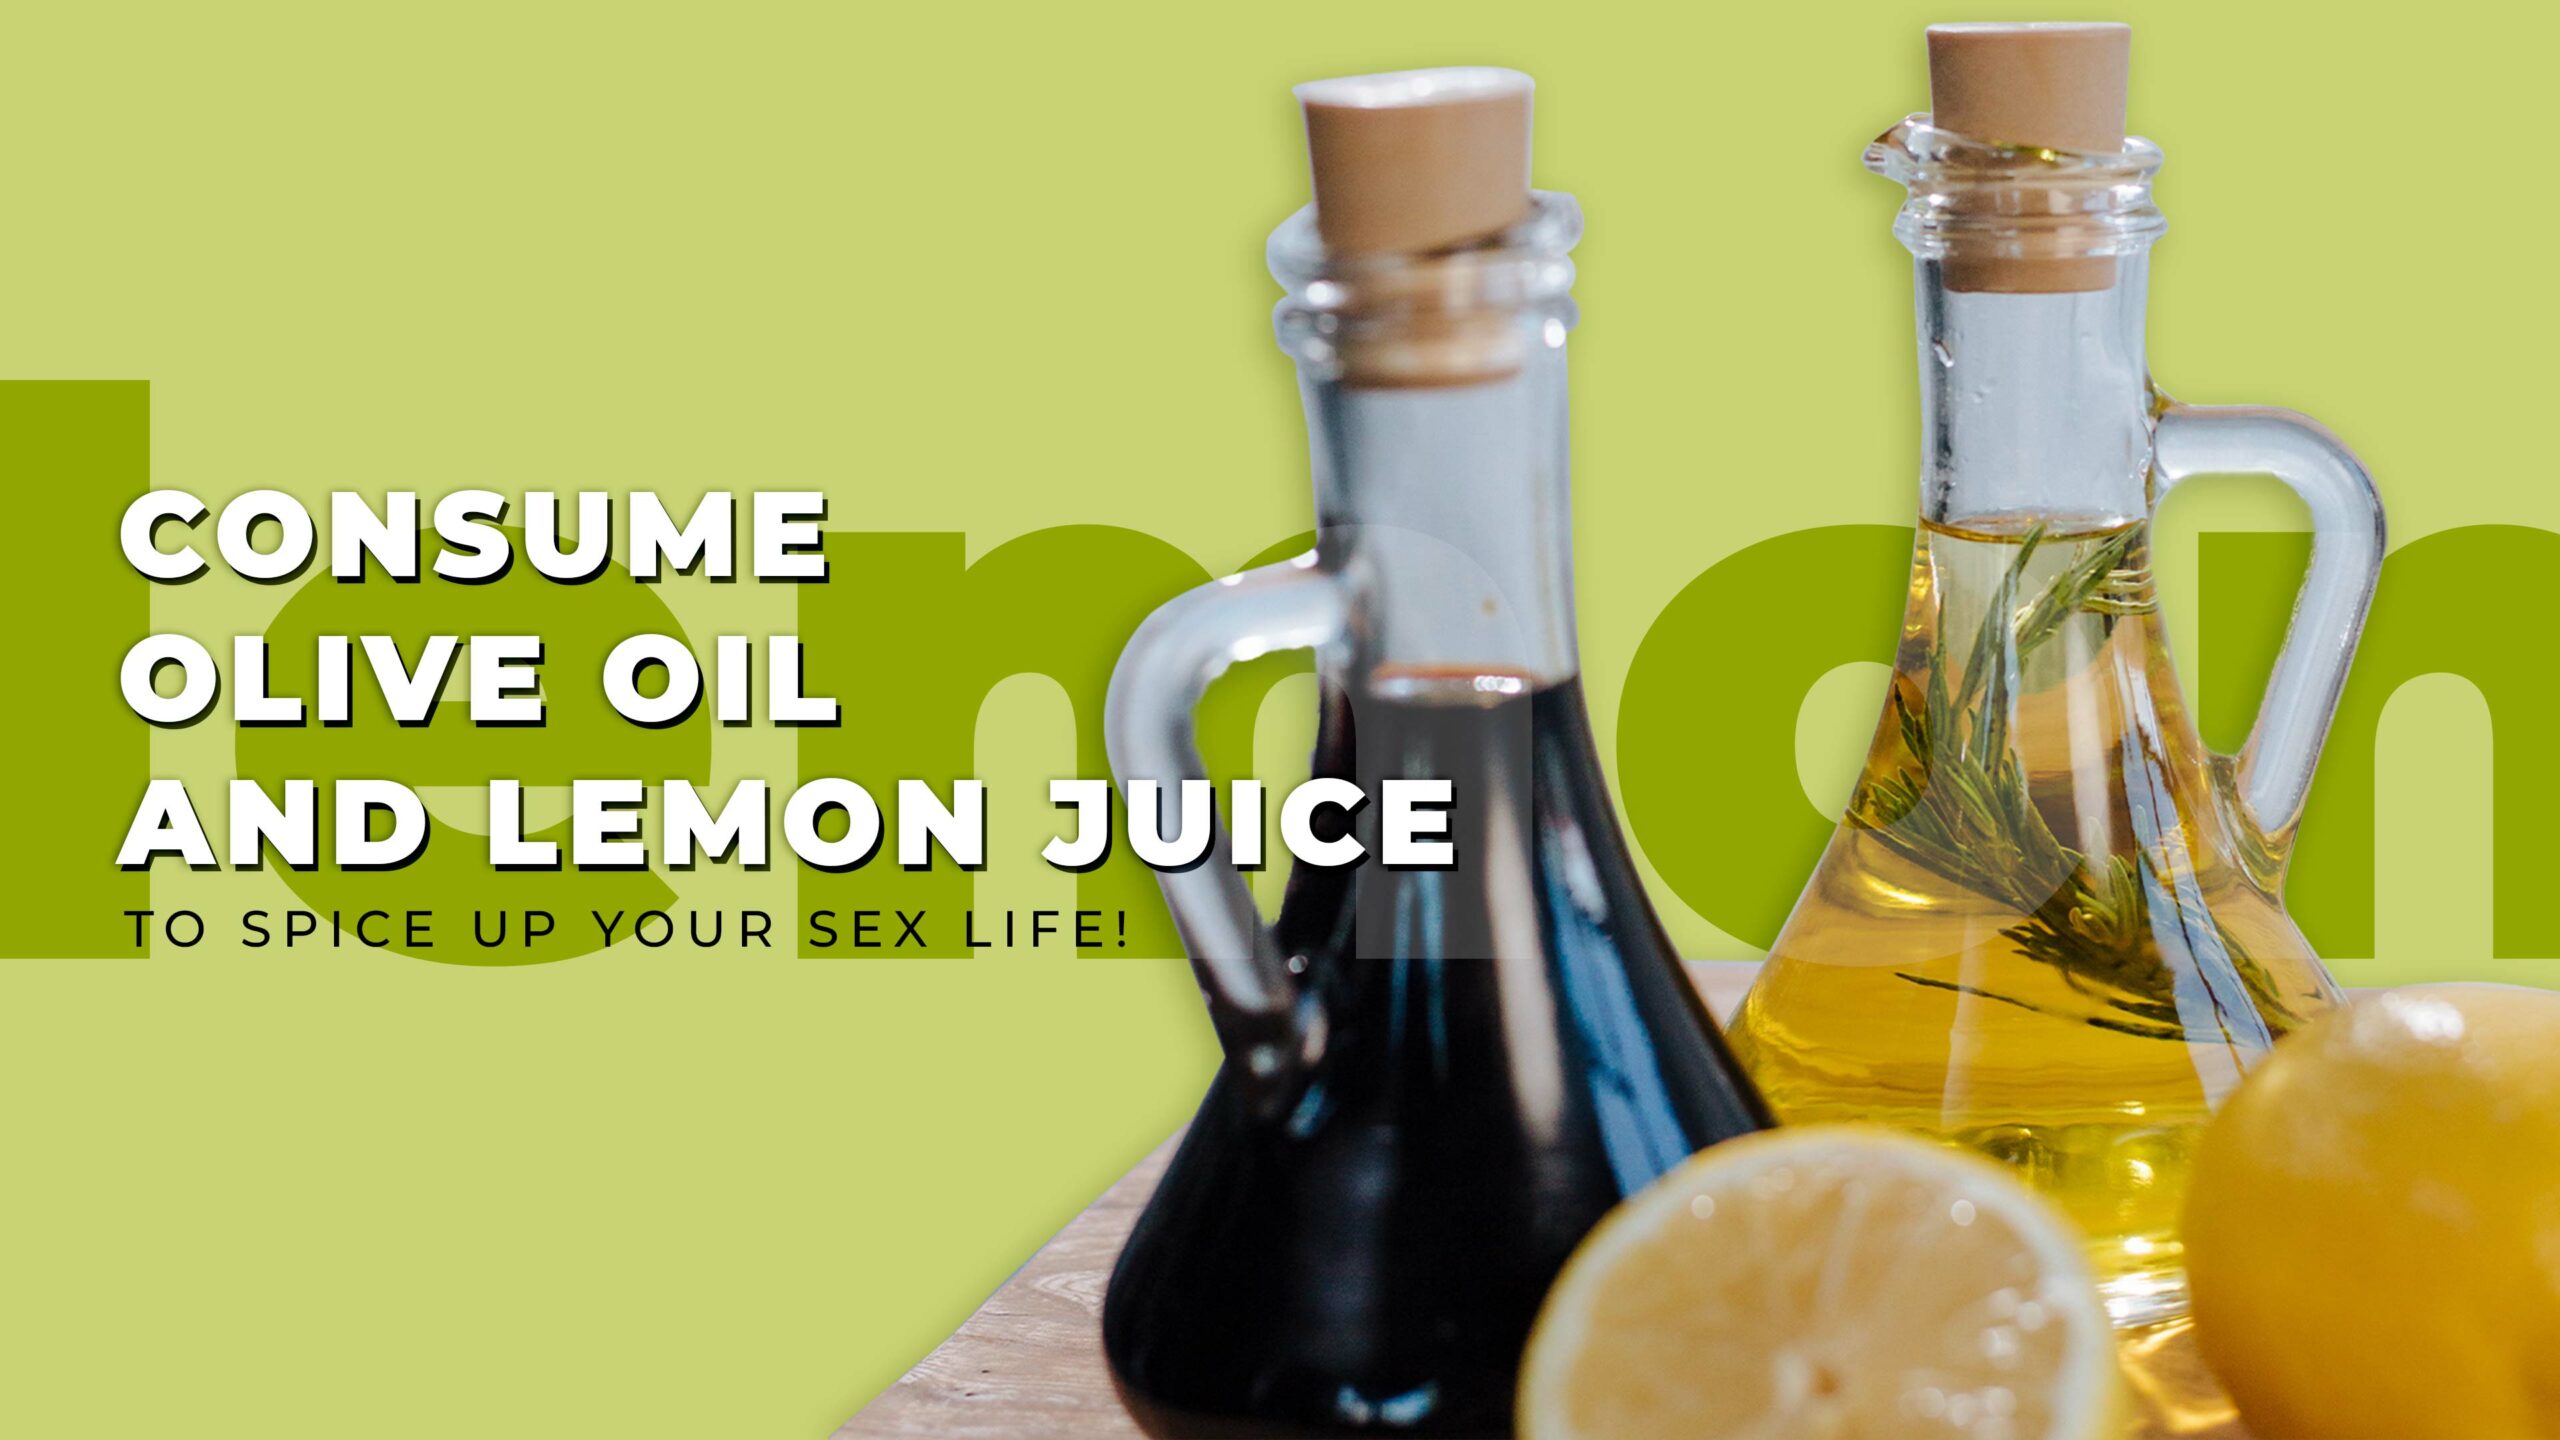 Consume Olive oil and Lemon Juice to spice up your sex life!